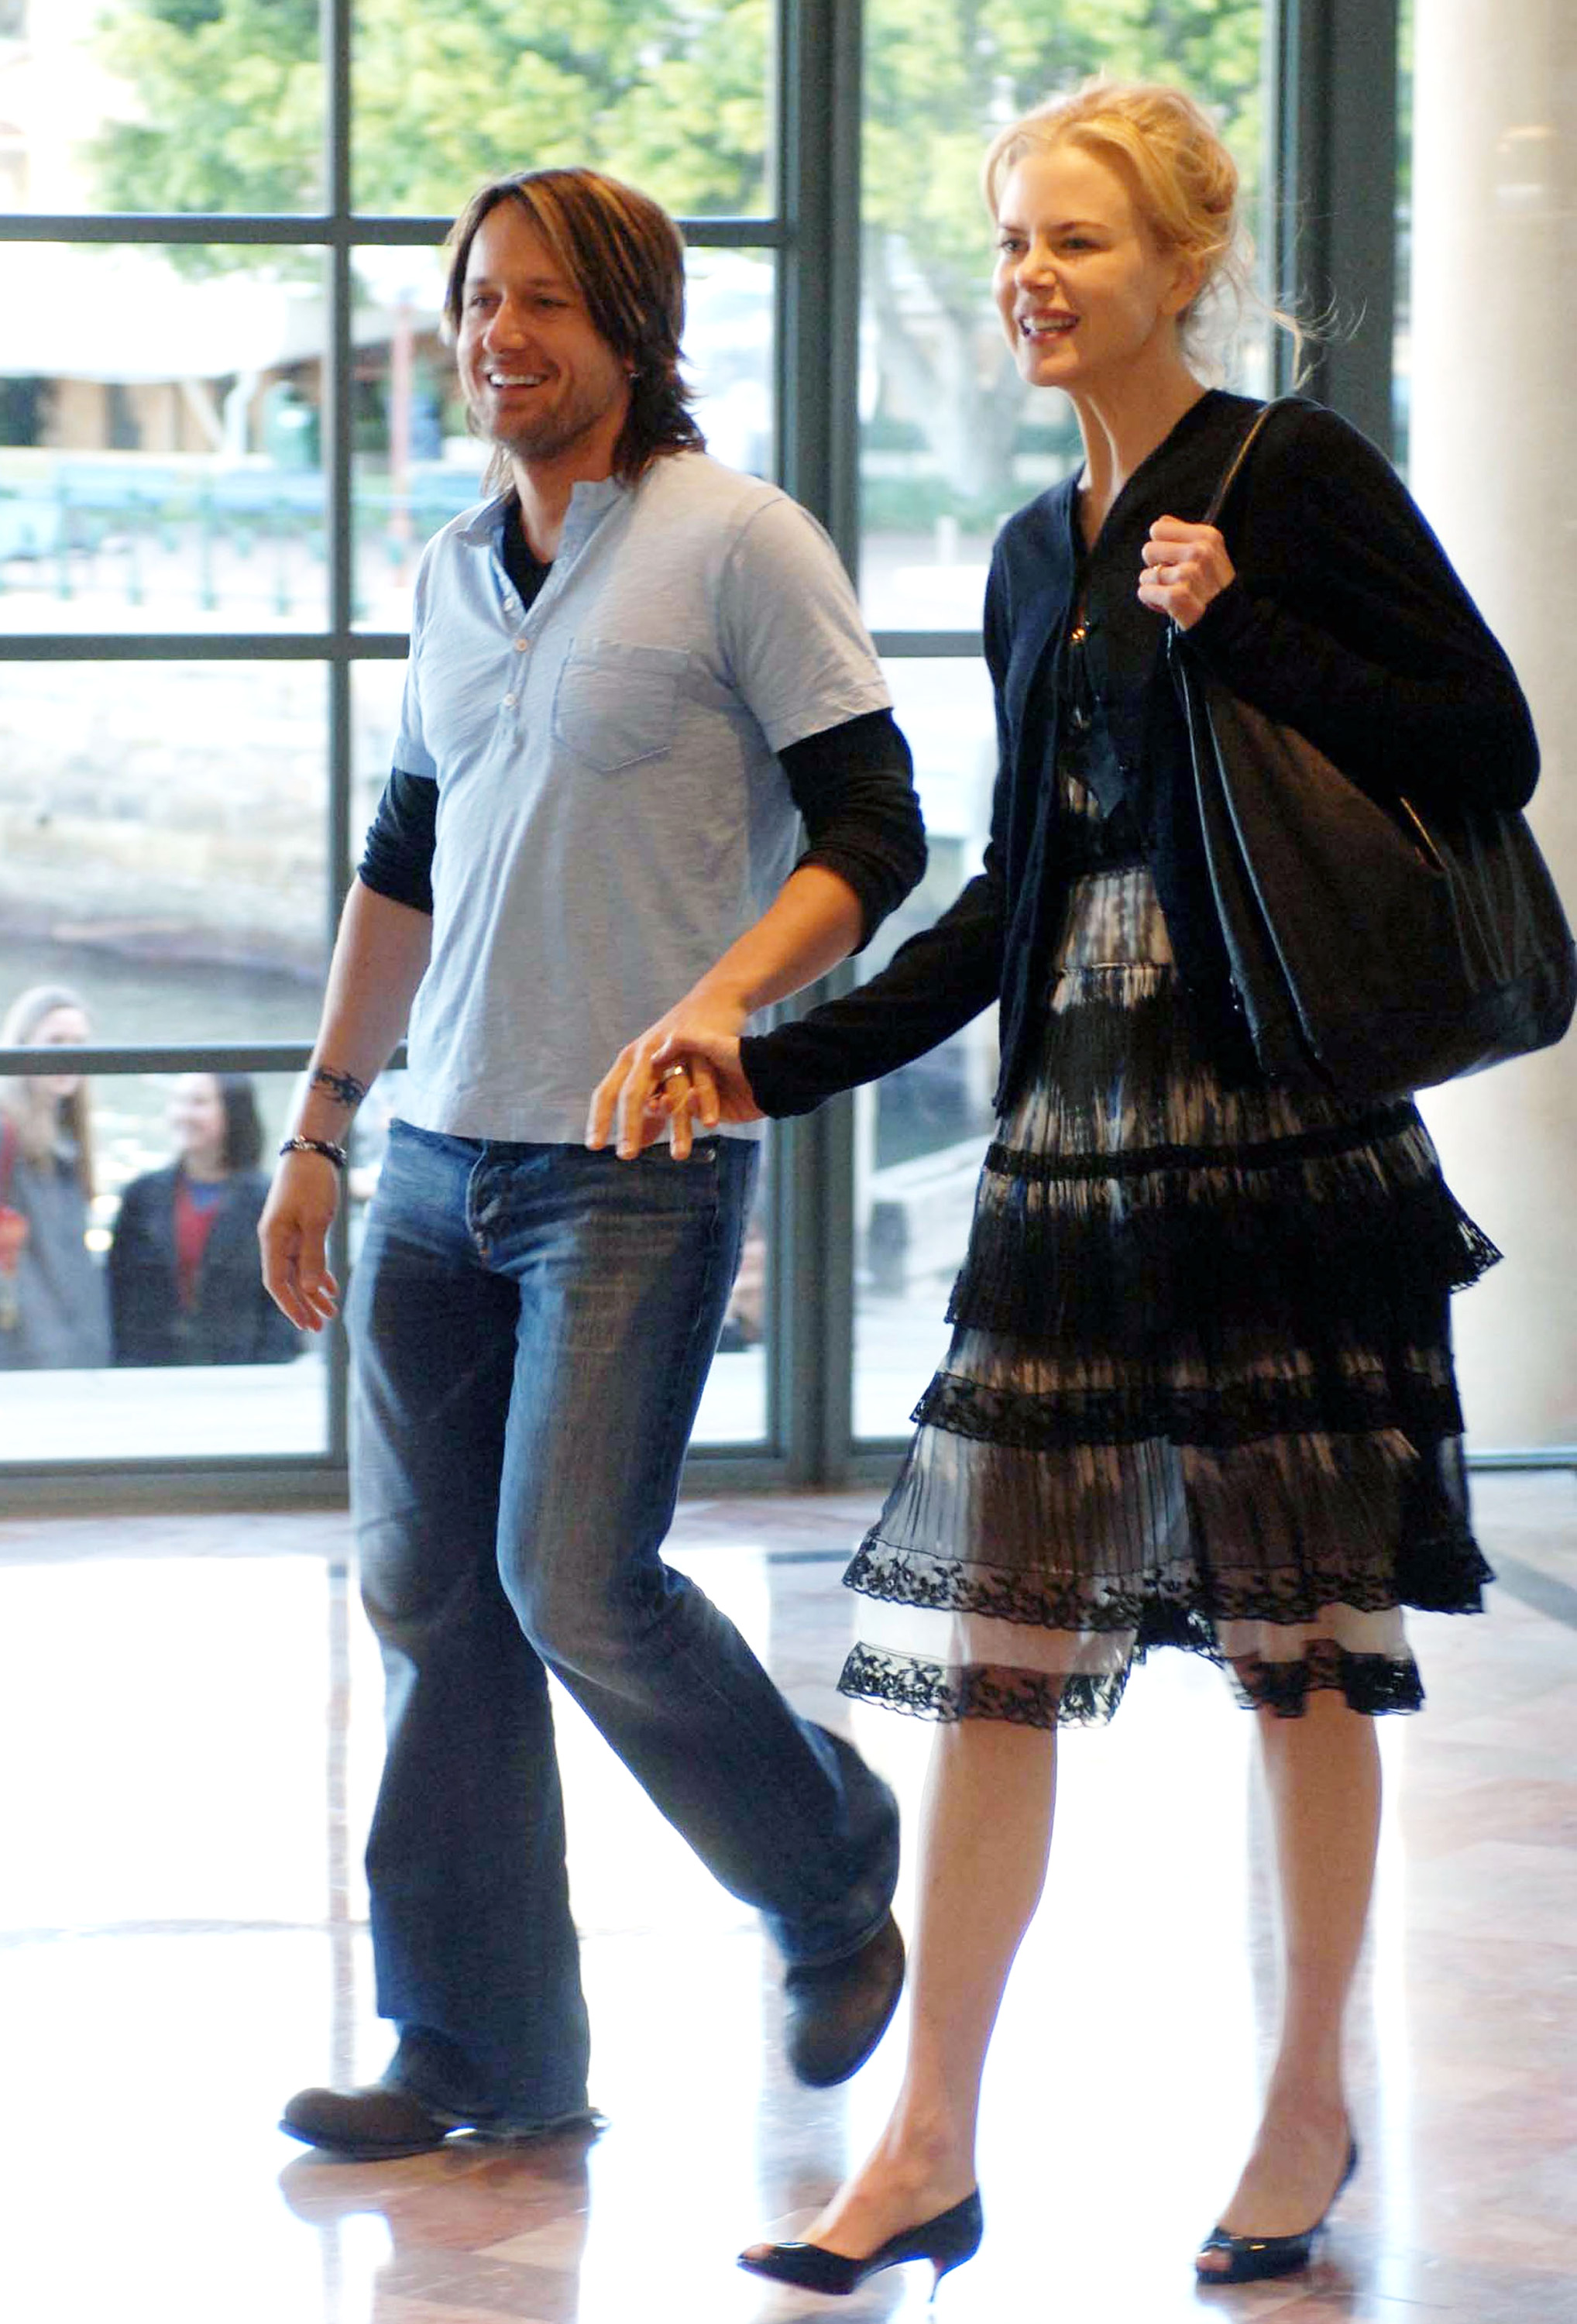 Nicole Kidman and Keith Urban on the day following their wedding ceremony in Sydney, Australia, on June 26, 2007. | Source: Getty Images